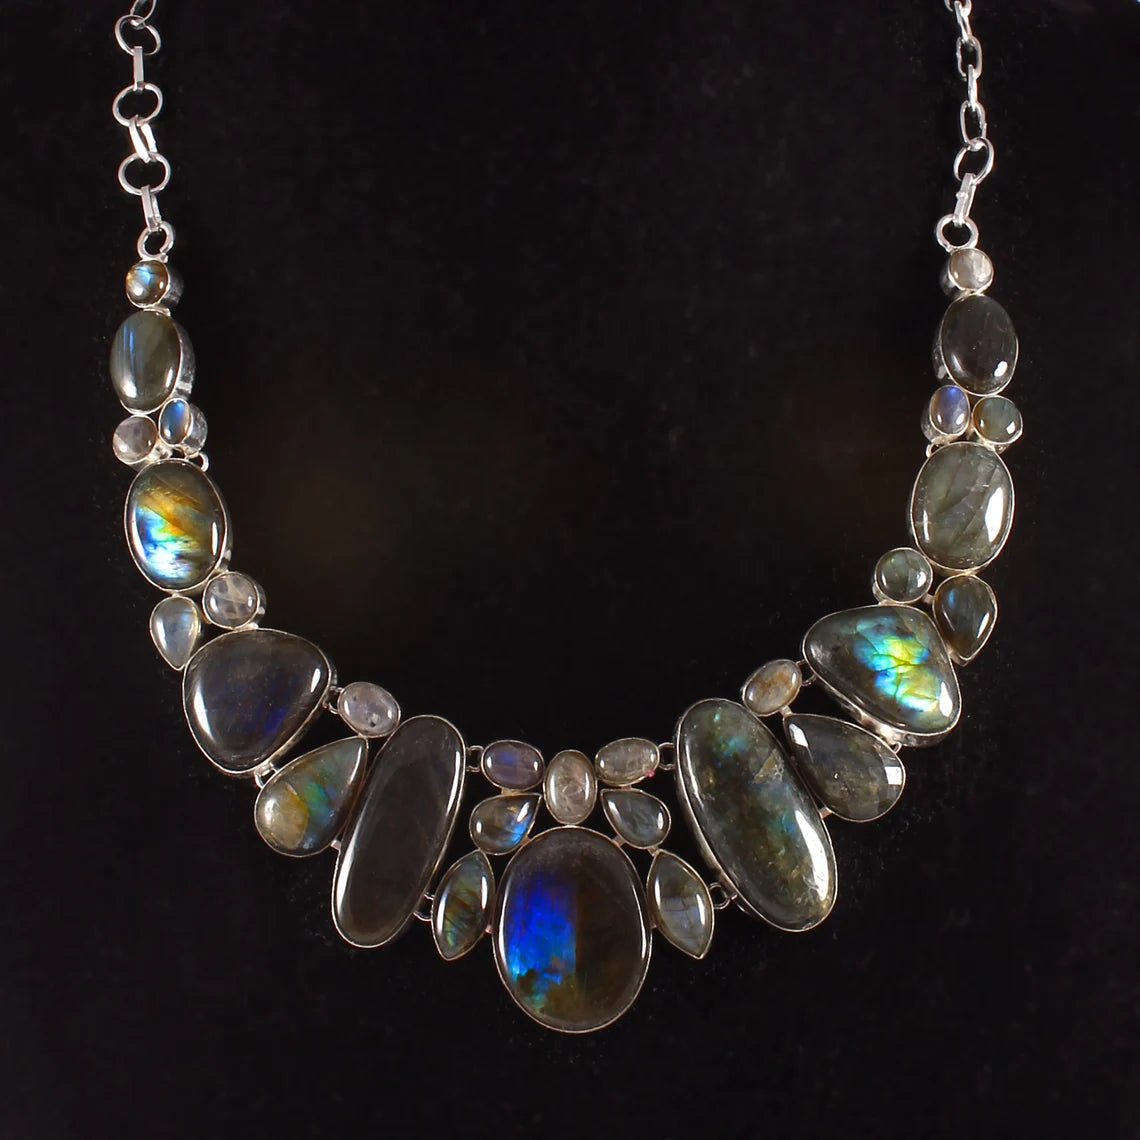 Labradorite Bib Necklace For Women - 925 Solid Sterling Silver Necklace